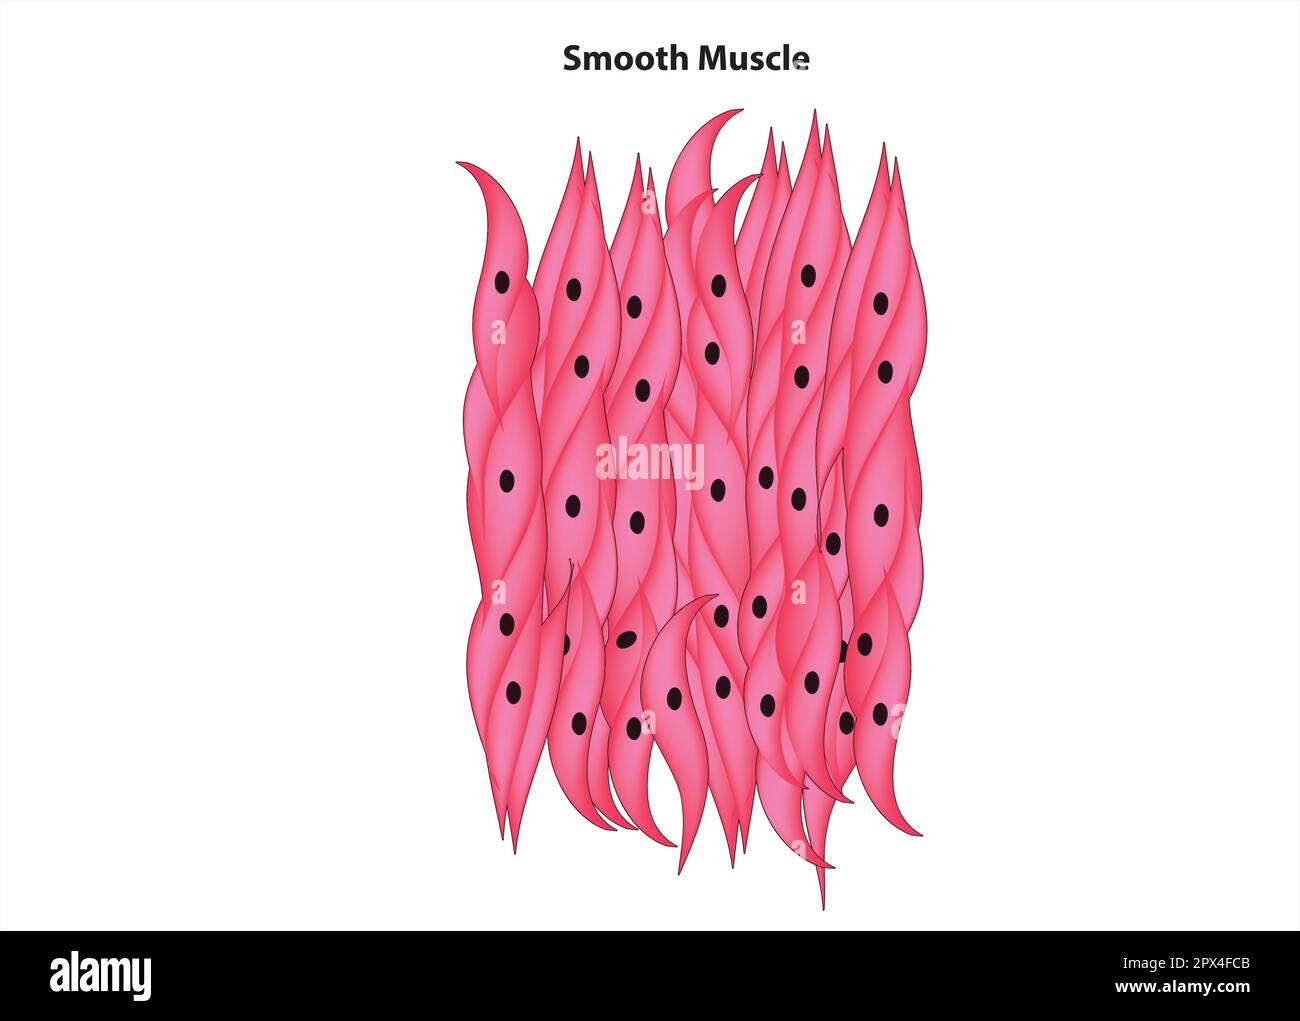 Smooth muscle tissue diagram (smooth muscle tissue) Stock Vector